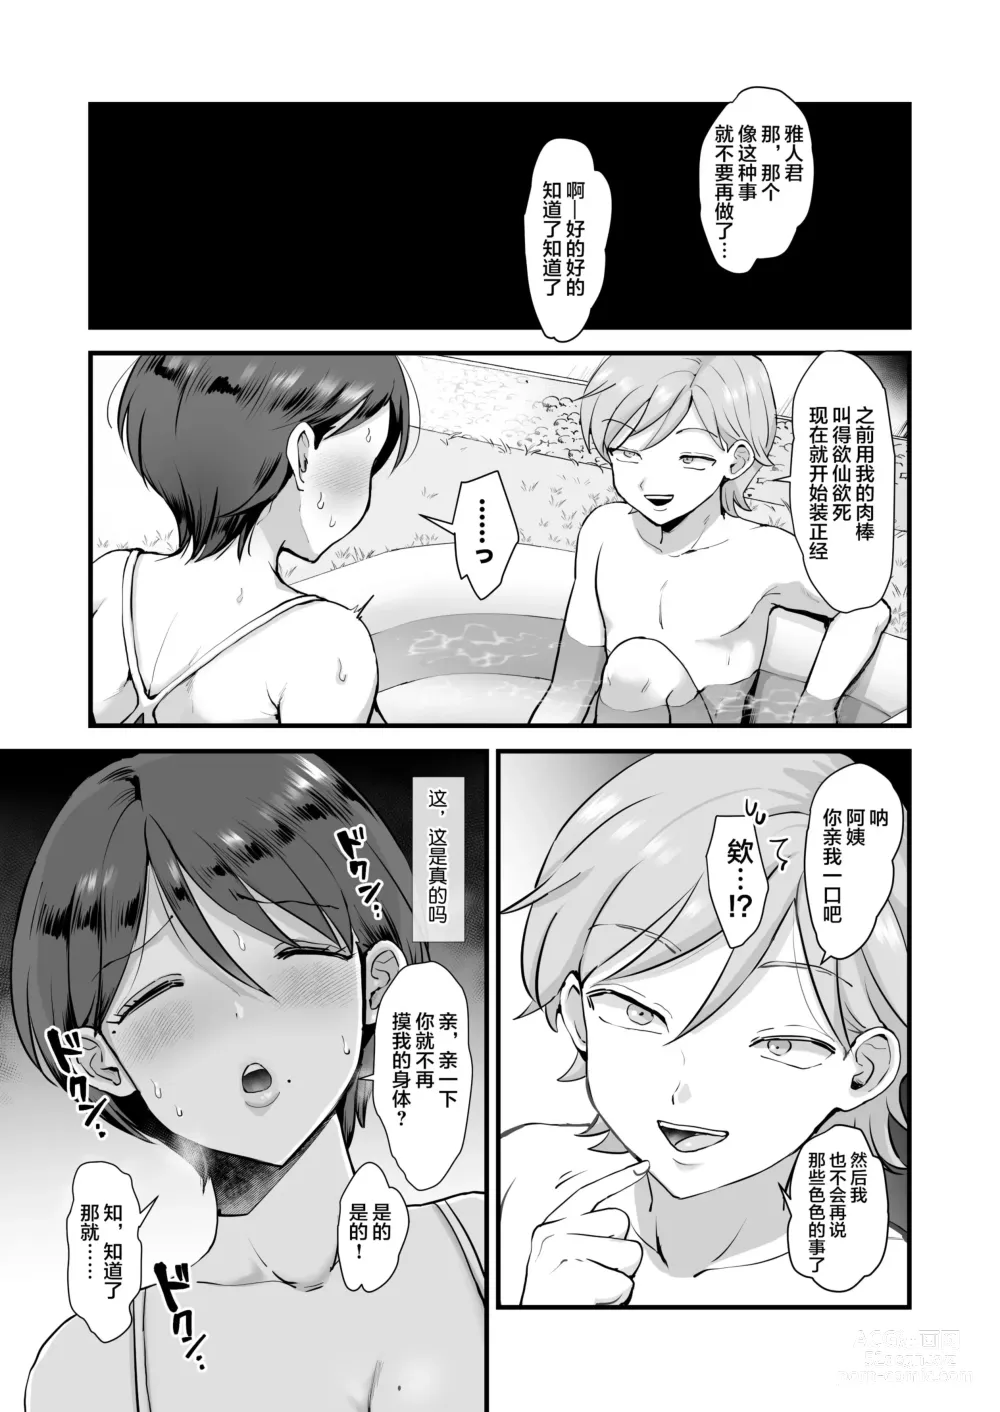 Page 12 of doujinshi sinistra (Eda)] Continued: A laid-back big-breasted mom. [Chinese translation